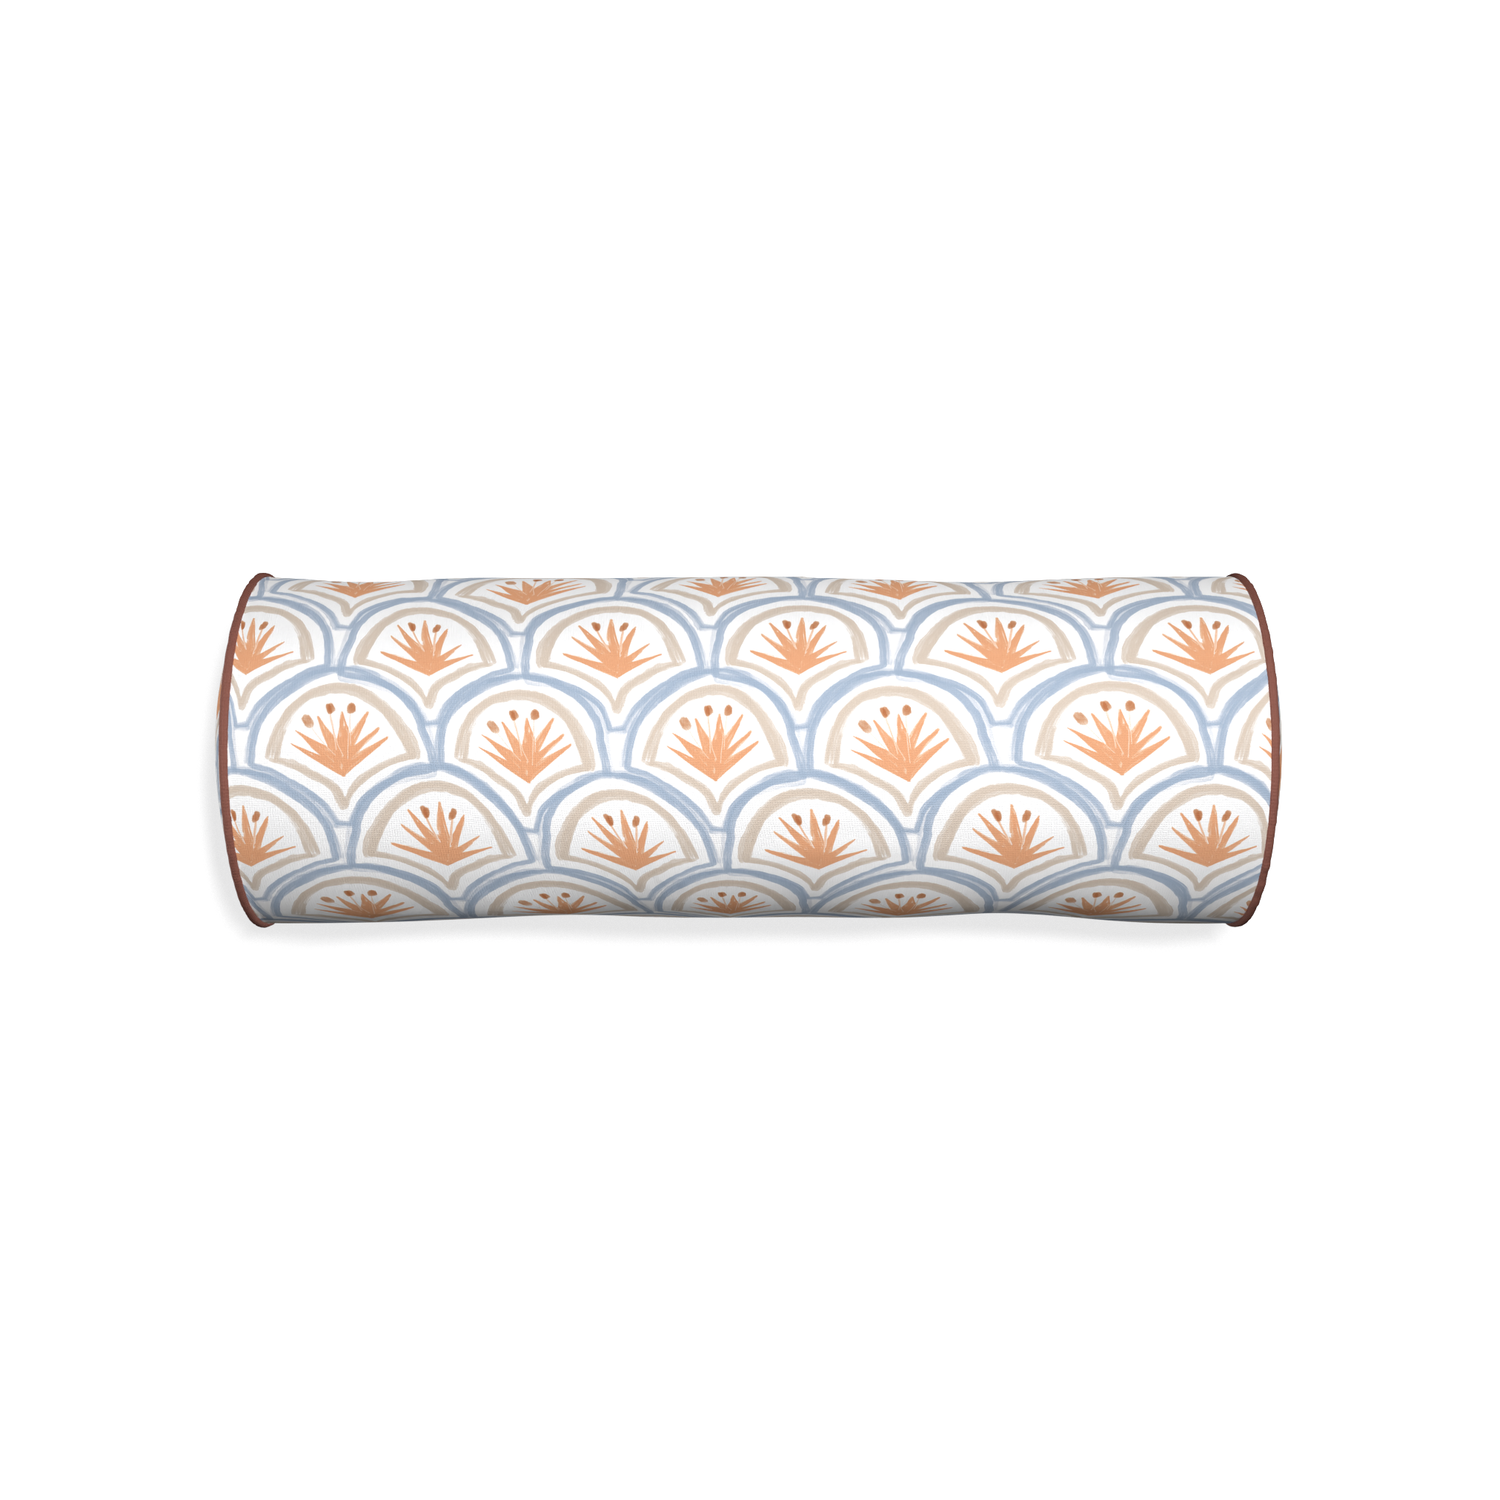 Bolster thatcher apricot custom art deco palm patternpillow with w piping on white background